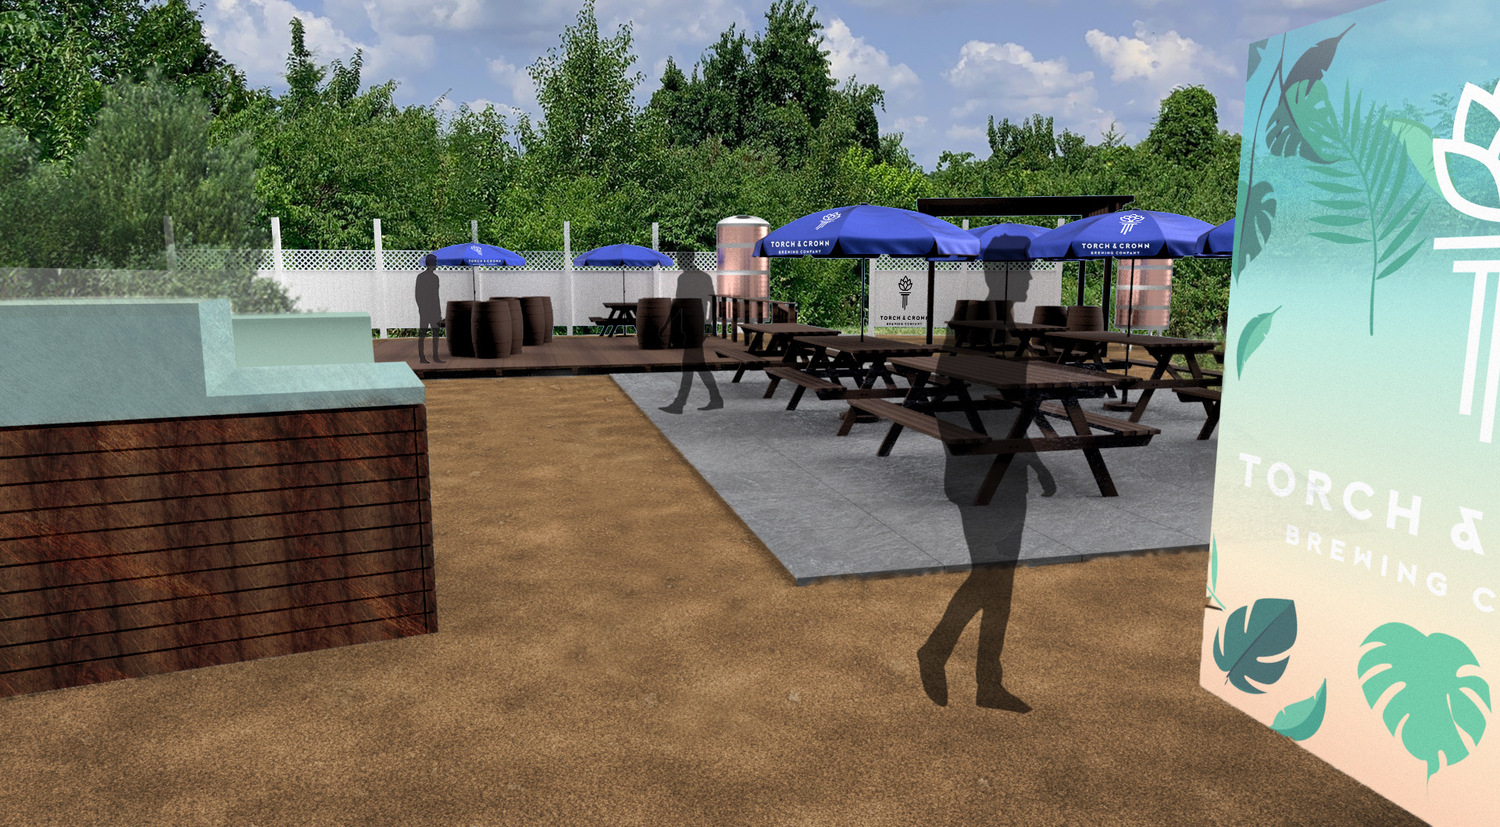 Renderings of Torch & Crown Brewing Company's new beer garden layout at Best Pizza & Dive Bar on the Napeague Stretch. COURTESY TORCH & CROWN BREWING COMPANY